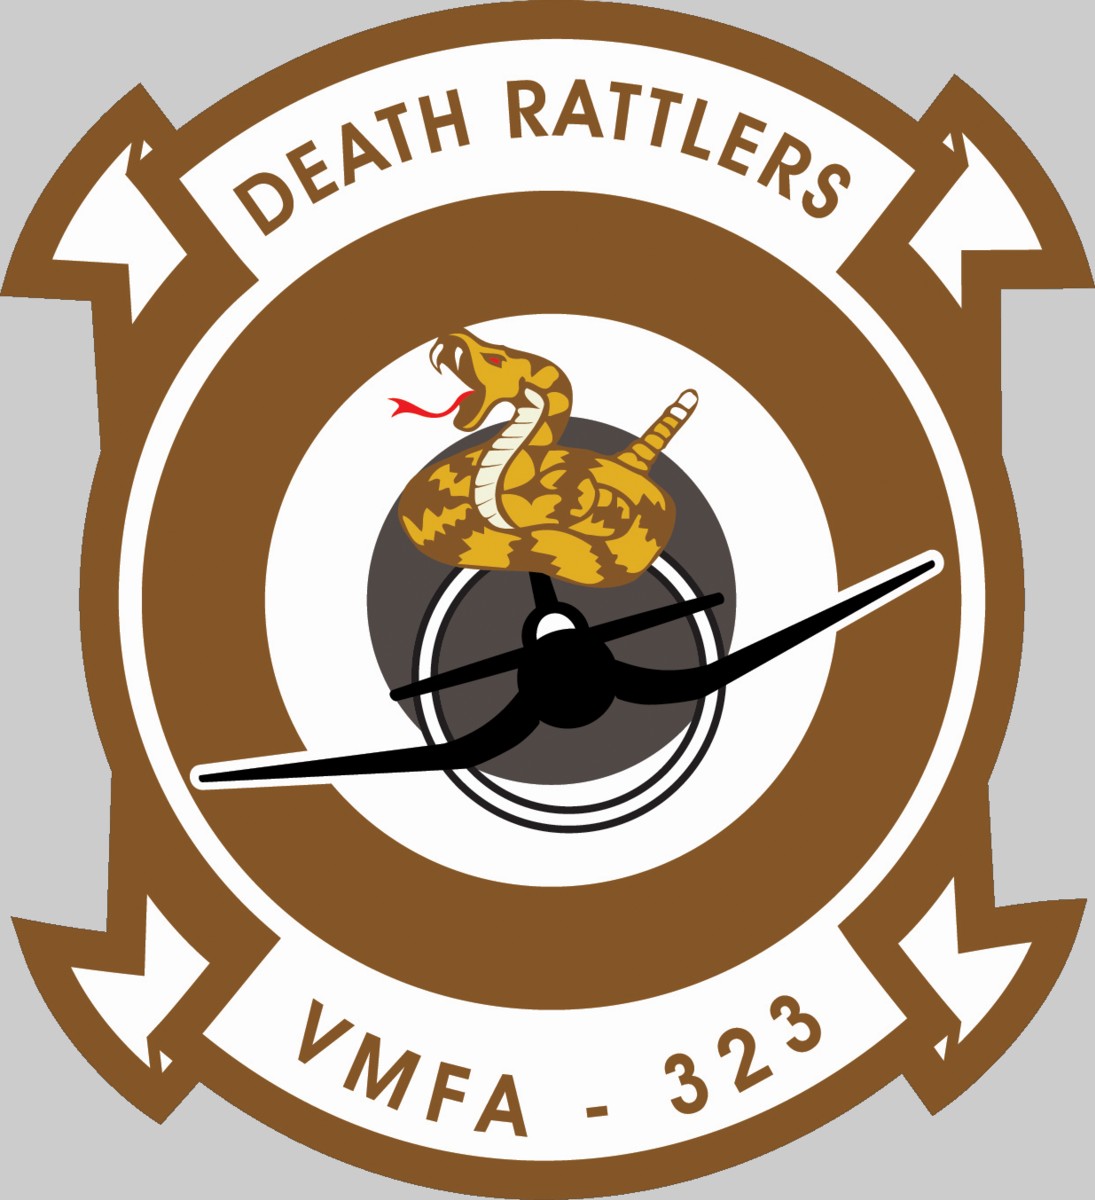 vmfa-323 death rattlers insignia crest patch badge marine fighter attack squadron usmc f/a-18c hornet 02x